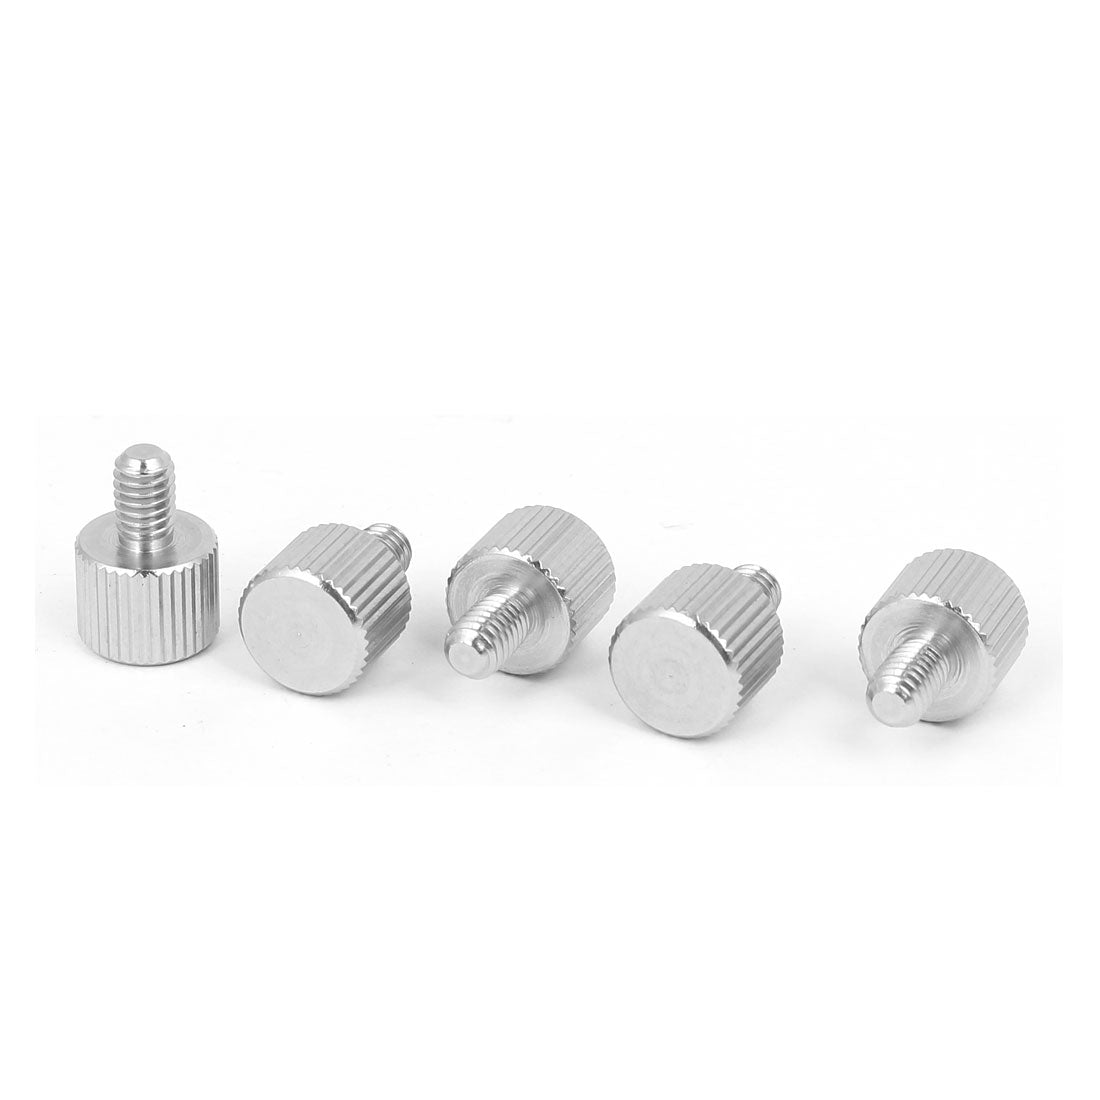 Uxcell Uxcell Computer PC Case Stainless Steel Flat Head Knurled Thumb Screw M4 x 6mm 5pcs